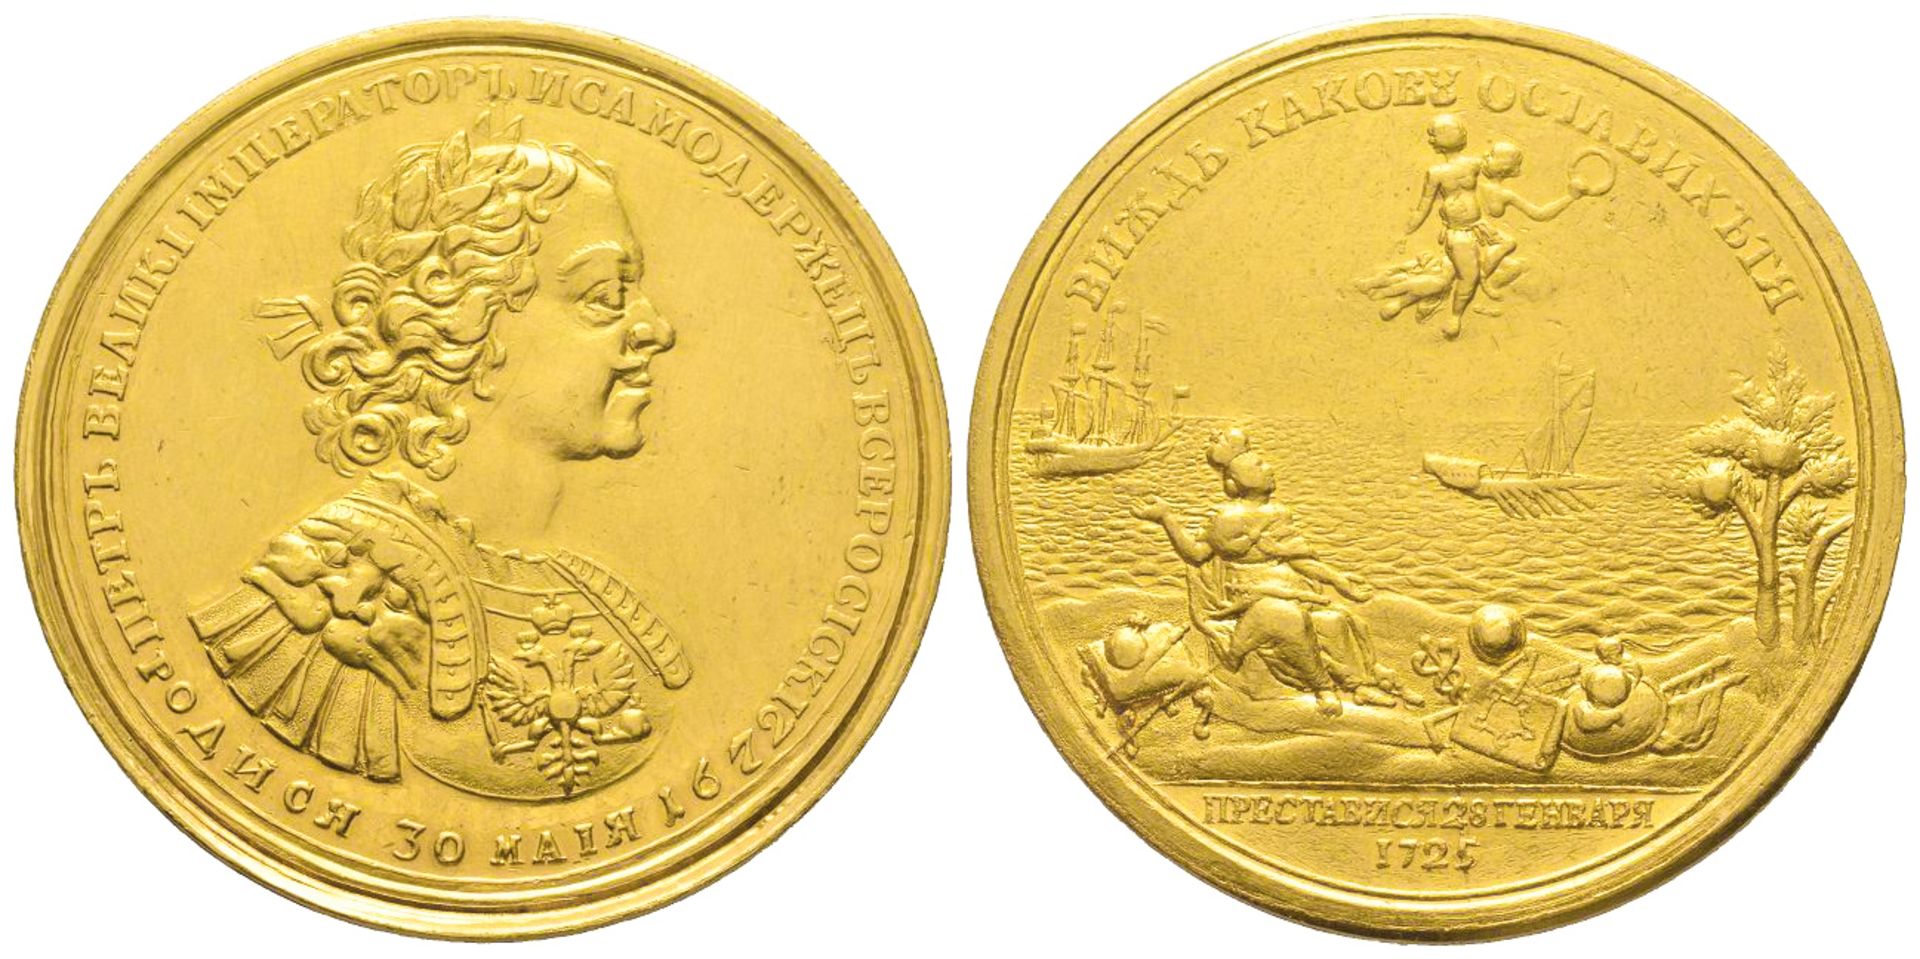 Peter the Great, 1682-1725 - Gold medal, 1725, by Cupy, commemorating his death, AU [...] - Bild 3 aus 3